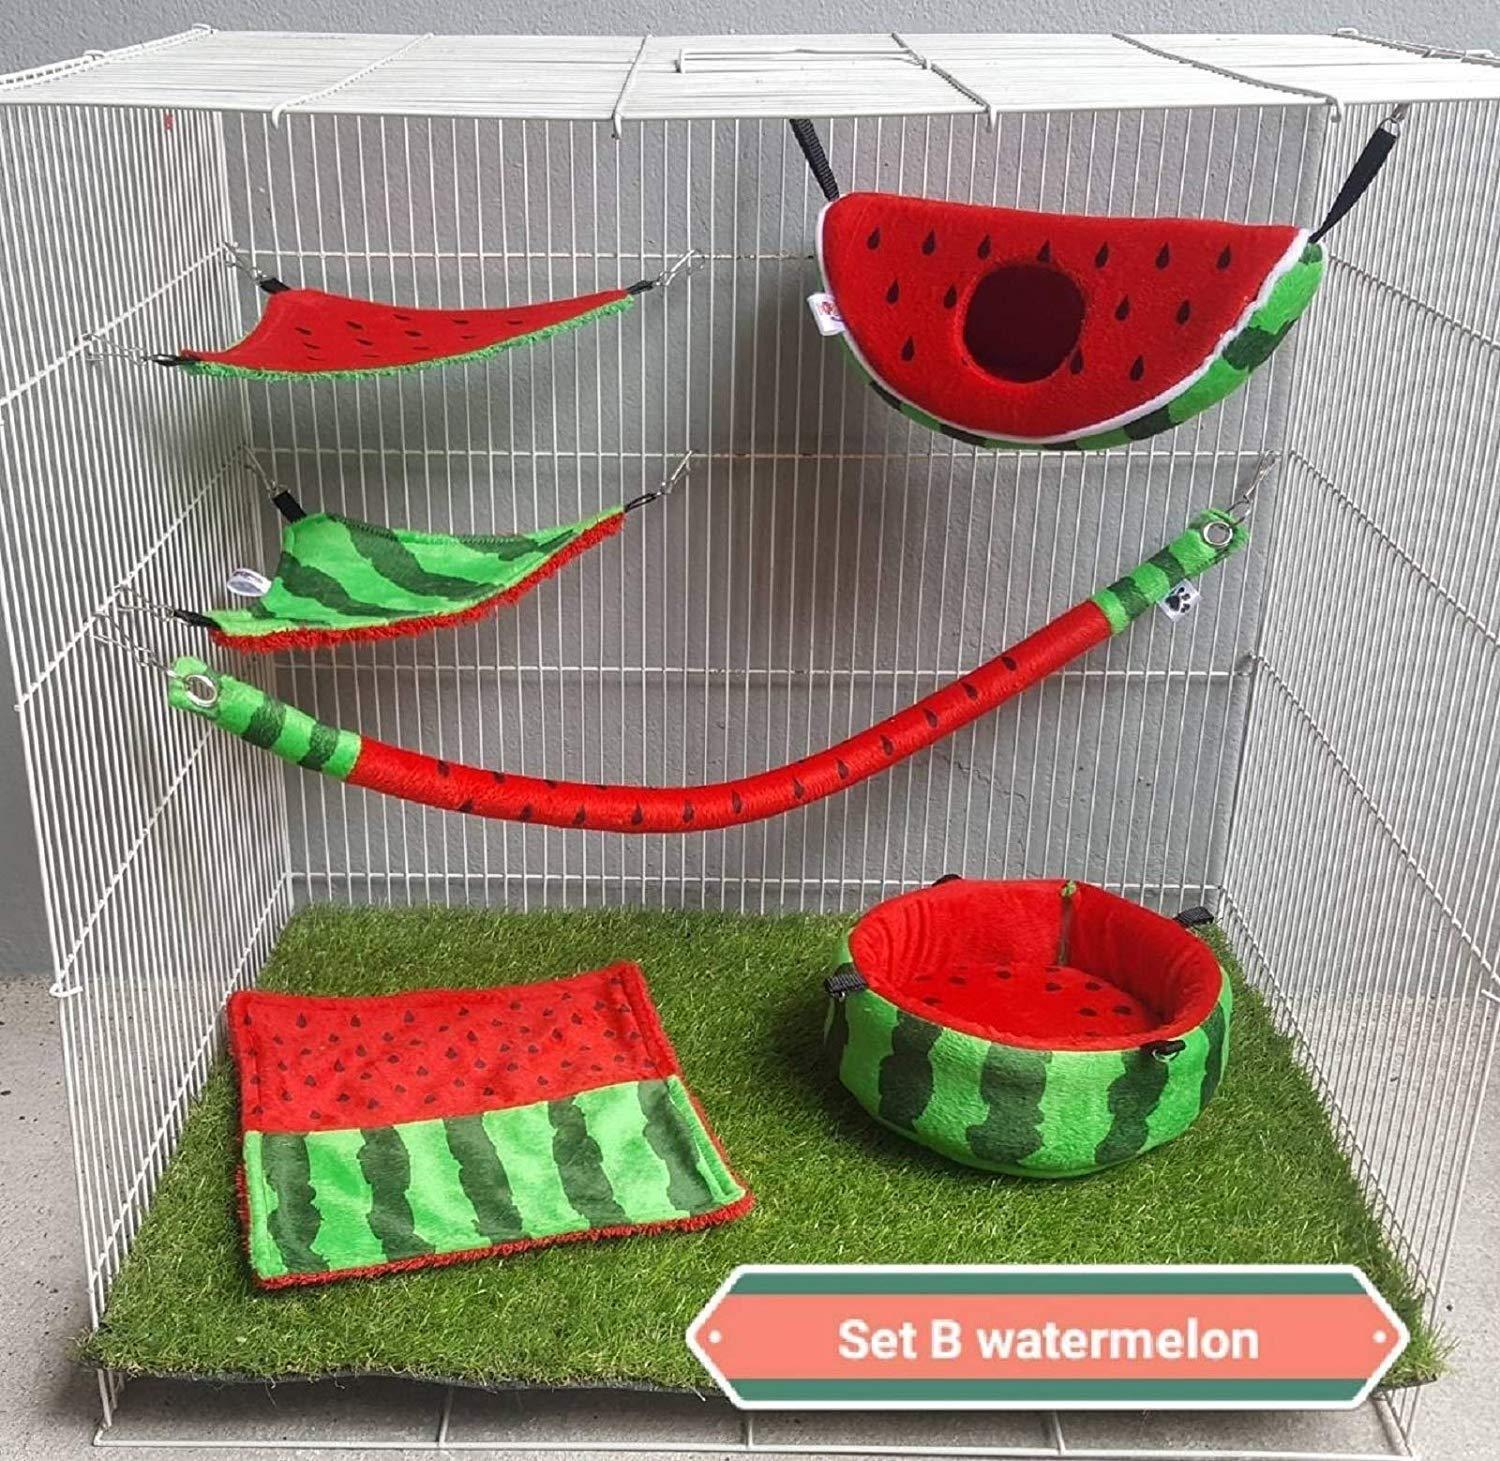 6 pieces/Set Cage Nest Set for Sugar Glider, Hamster, Squirrel, Marmoset, Chinchillas, Small Exotic Pet Cage Set B Watermelon Pattern Green Red Color